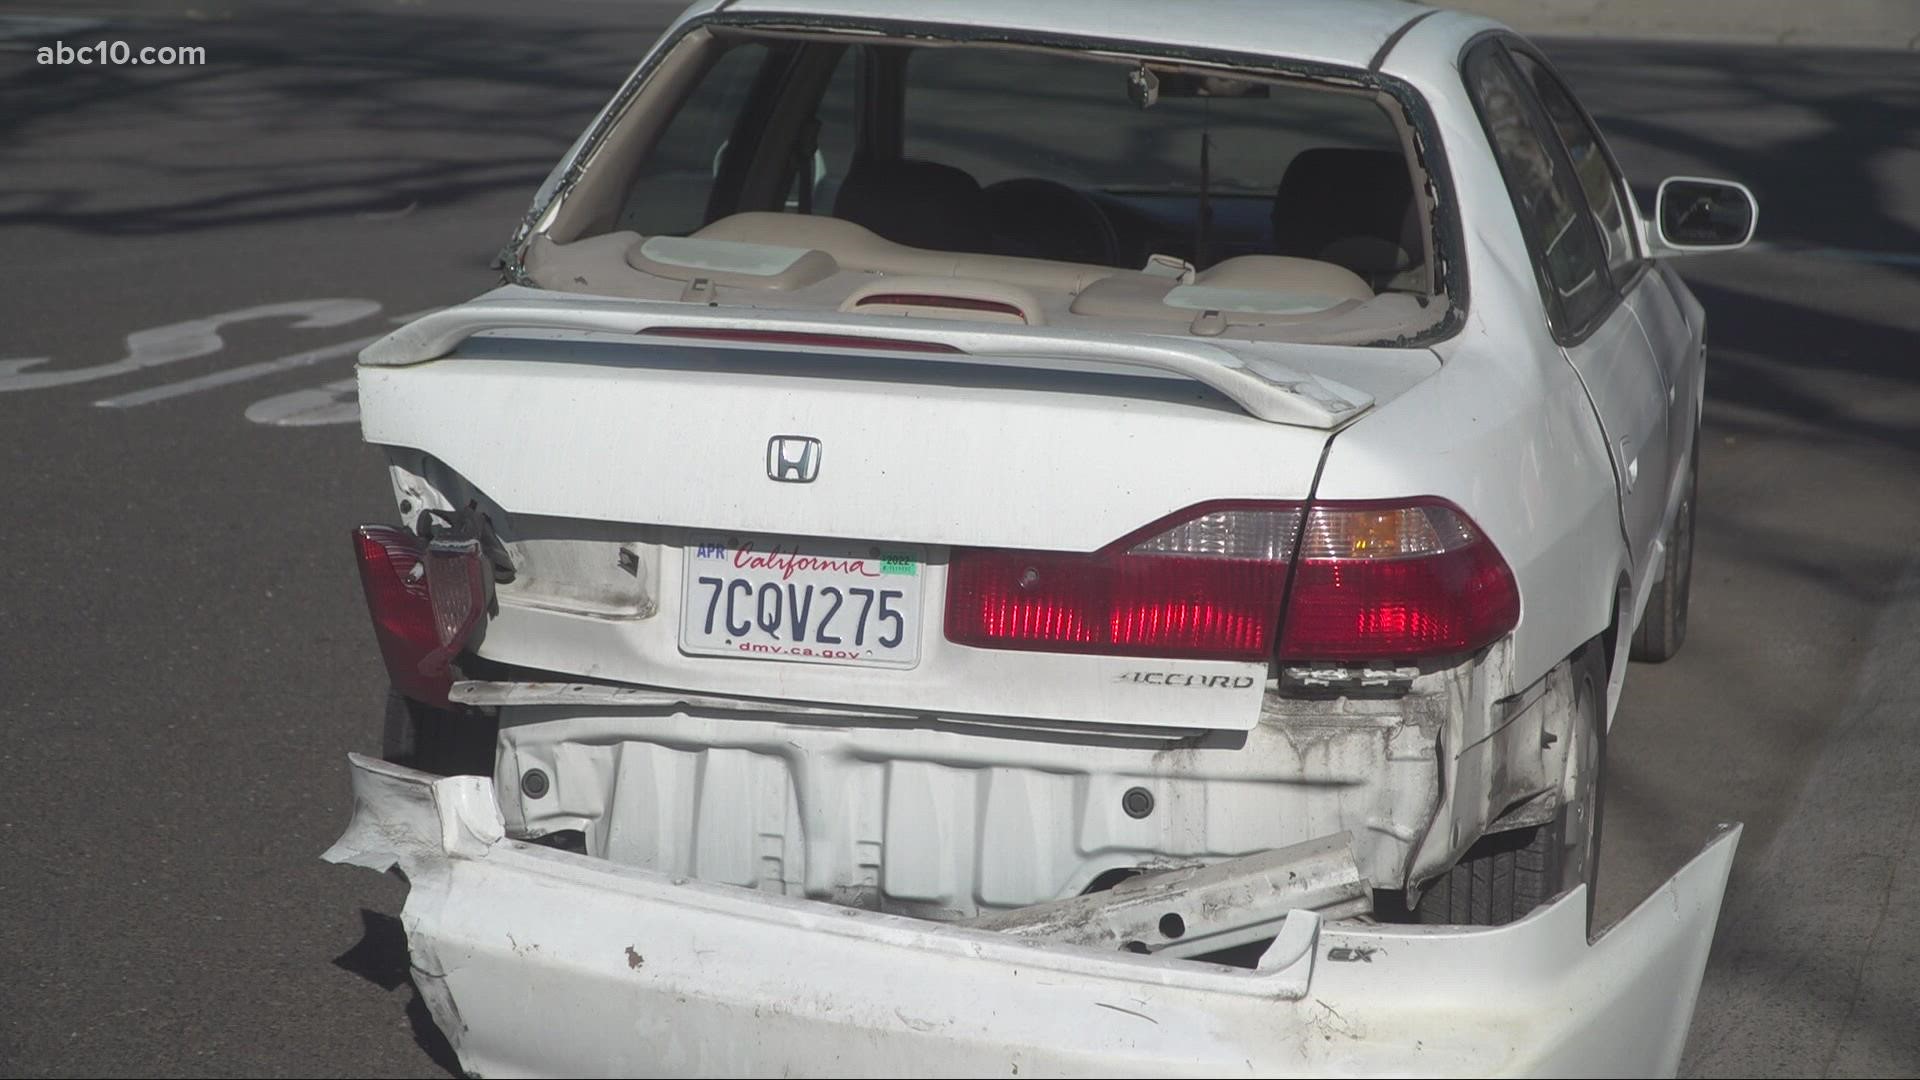 Multiple parked cars were damaged in a hit and run crash in Sacramento County along La Riviera, and deputies are asking for help in finding whoever did it.